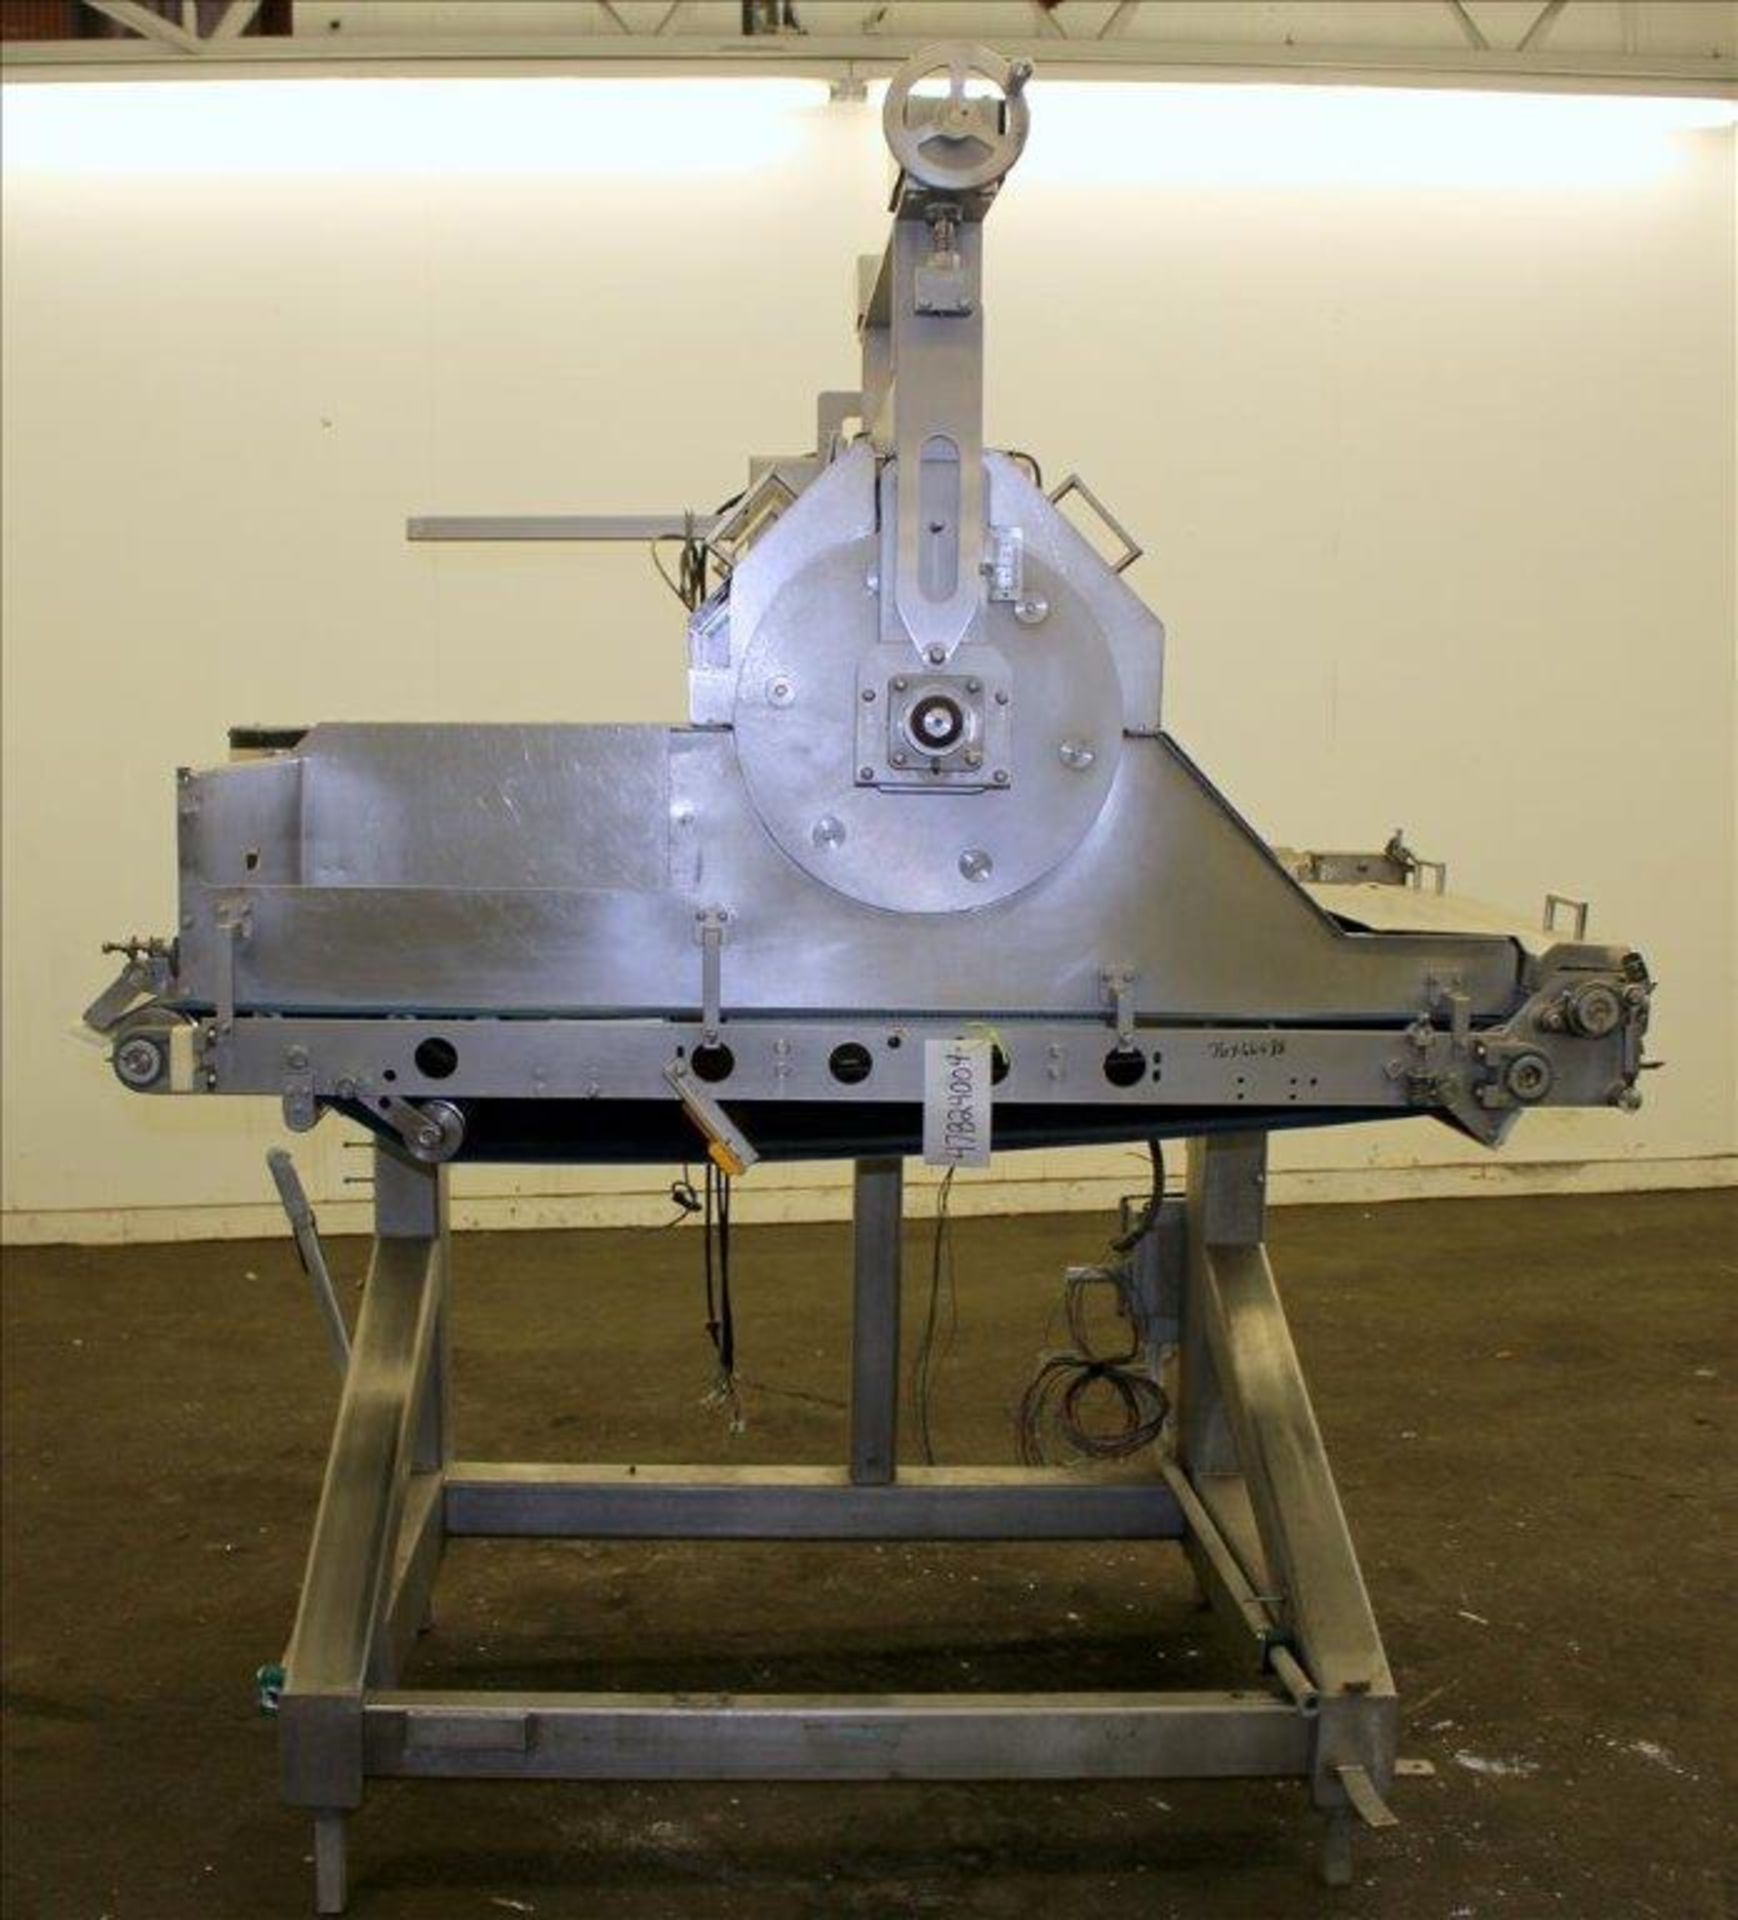 Waterfall Cheese/Applicator for Pizza, 304 Stainless Steel. Has 28" wide x 60" long belt conveyor - Image 22 of 46